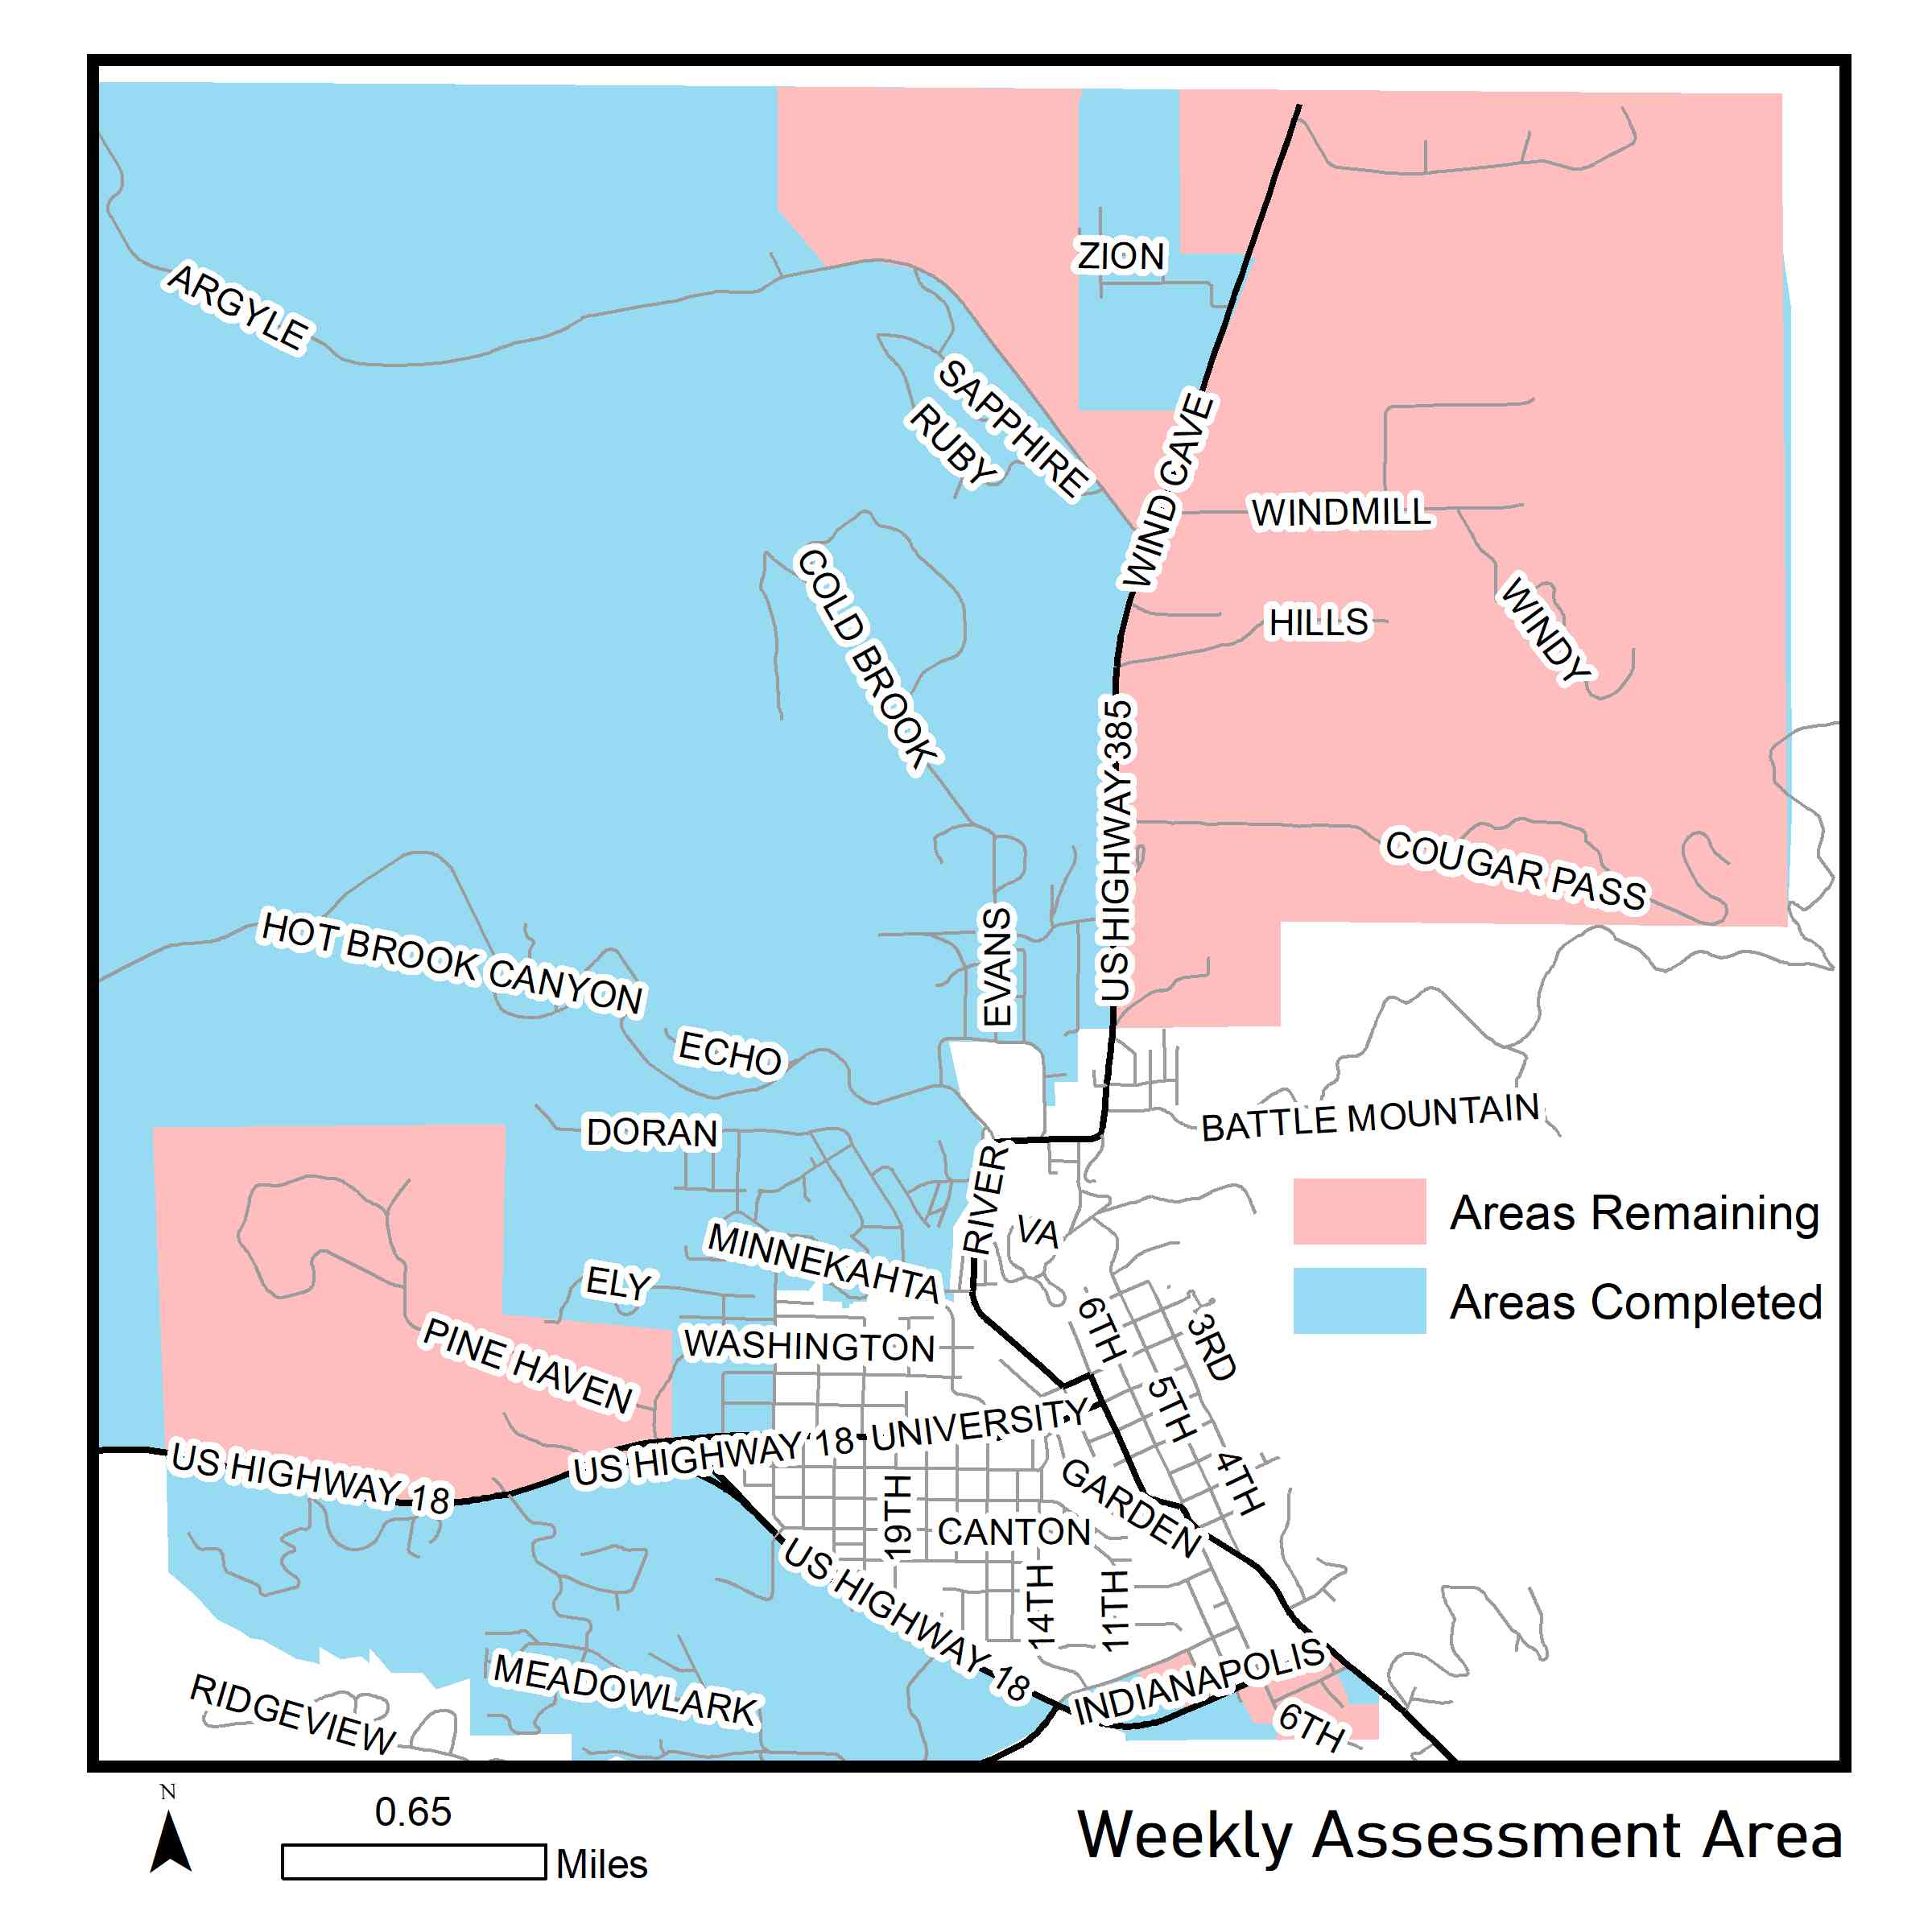 Map of reassessment area for week of September 14th, 2020.